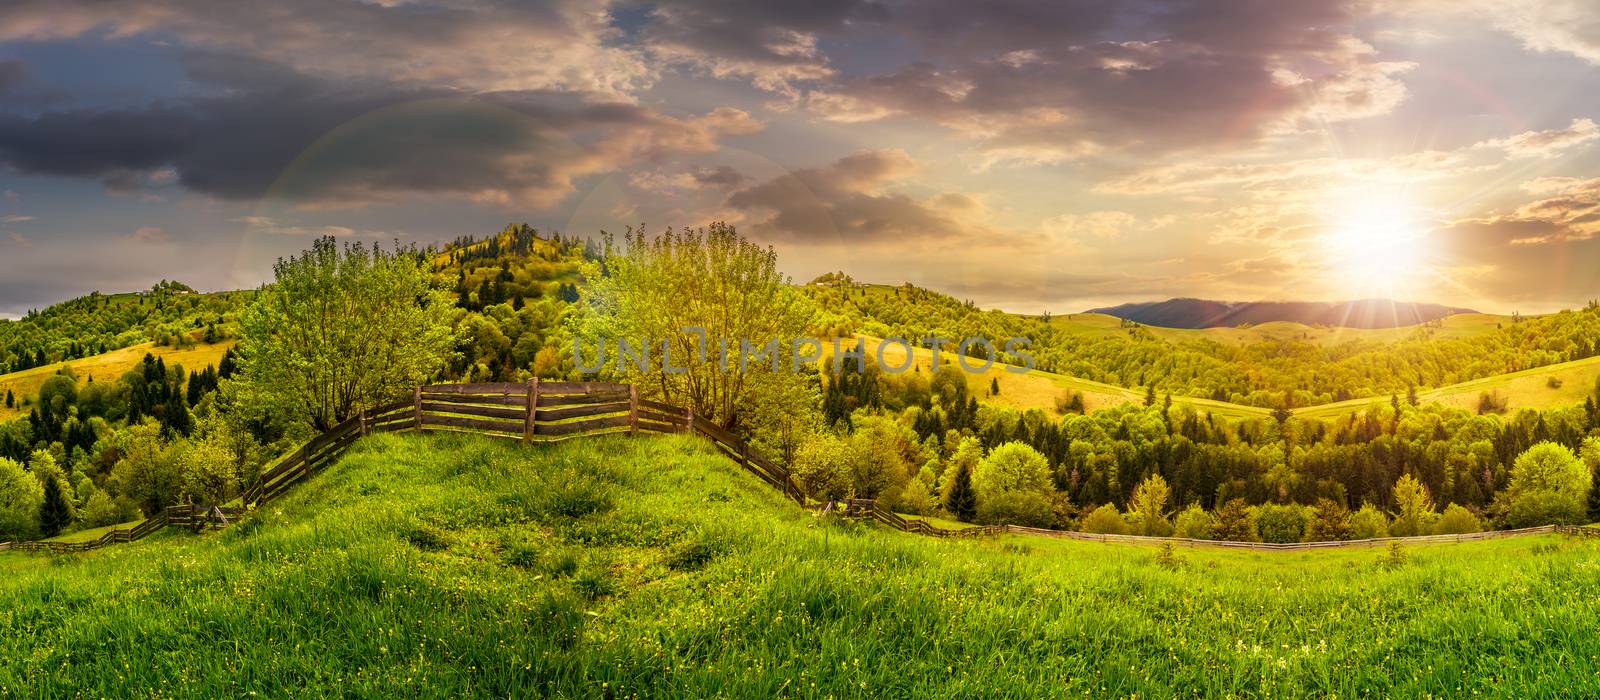 fence on hillside meadow in mountain  at sunset by Pellinni